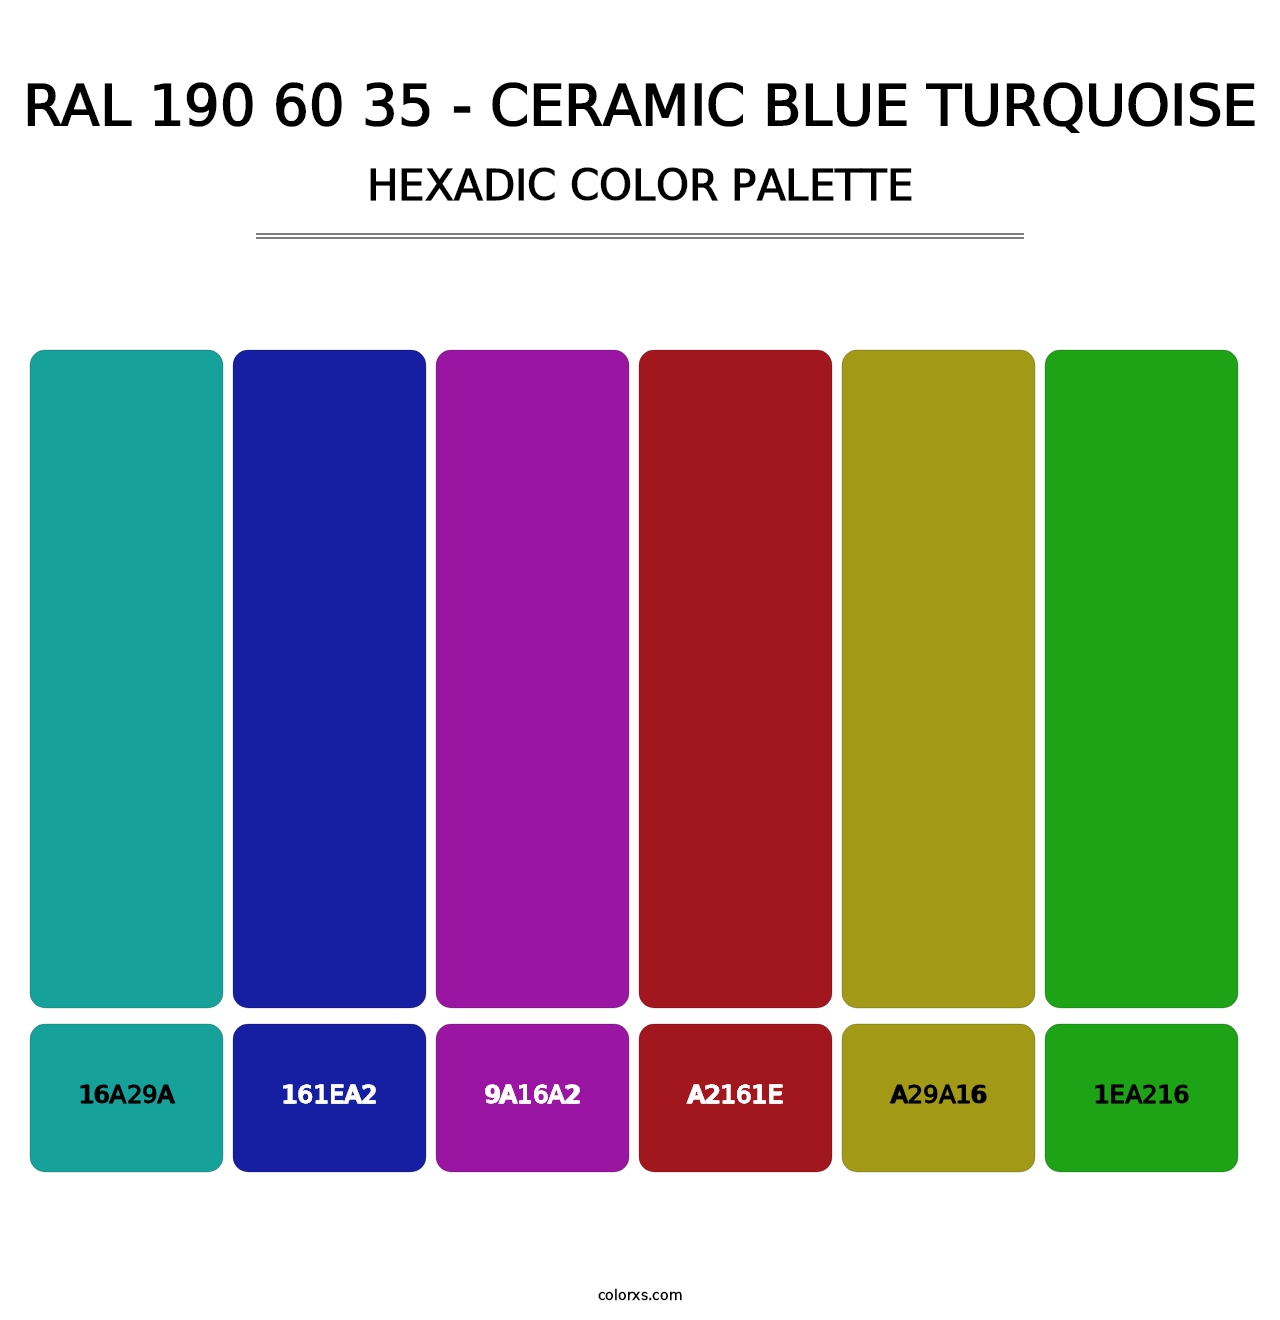 RAL 190 60 35 - Ceramic Blue Turquoise - Hexadic Color Palette